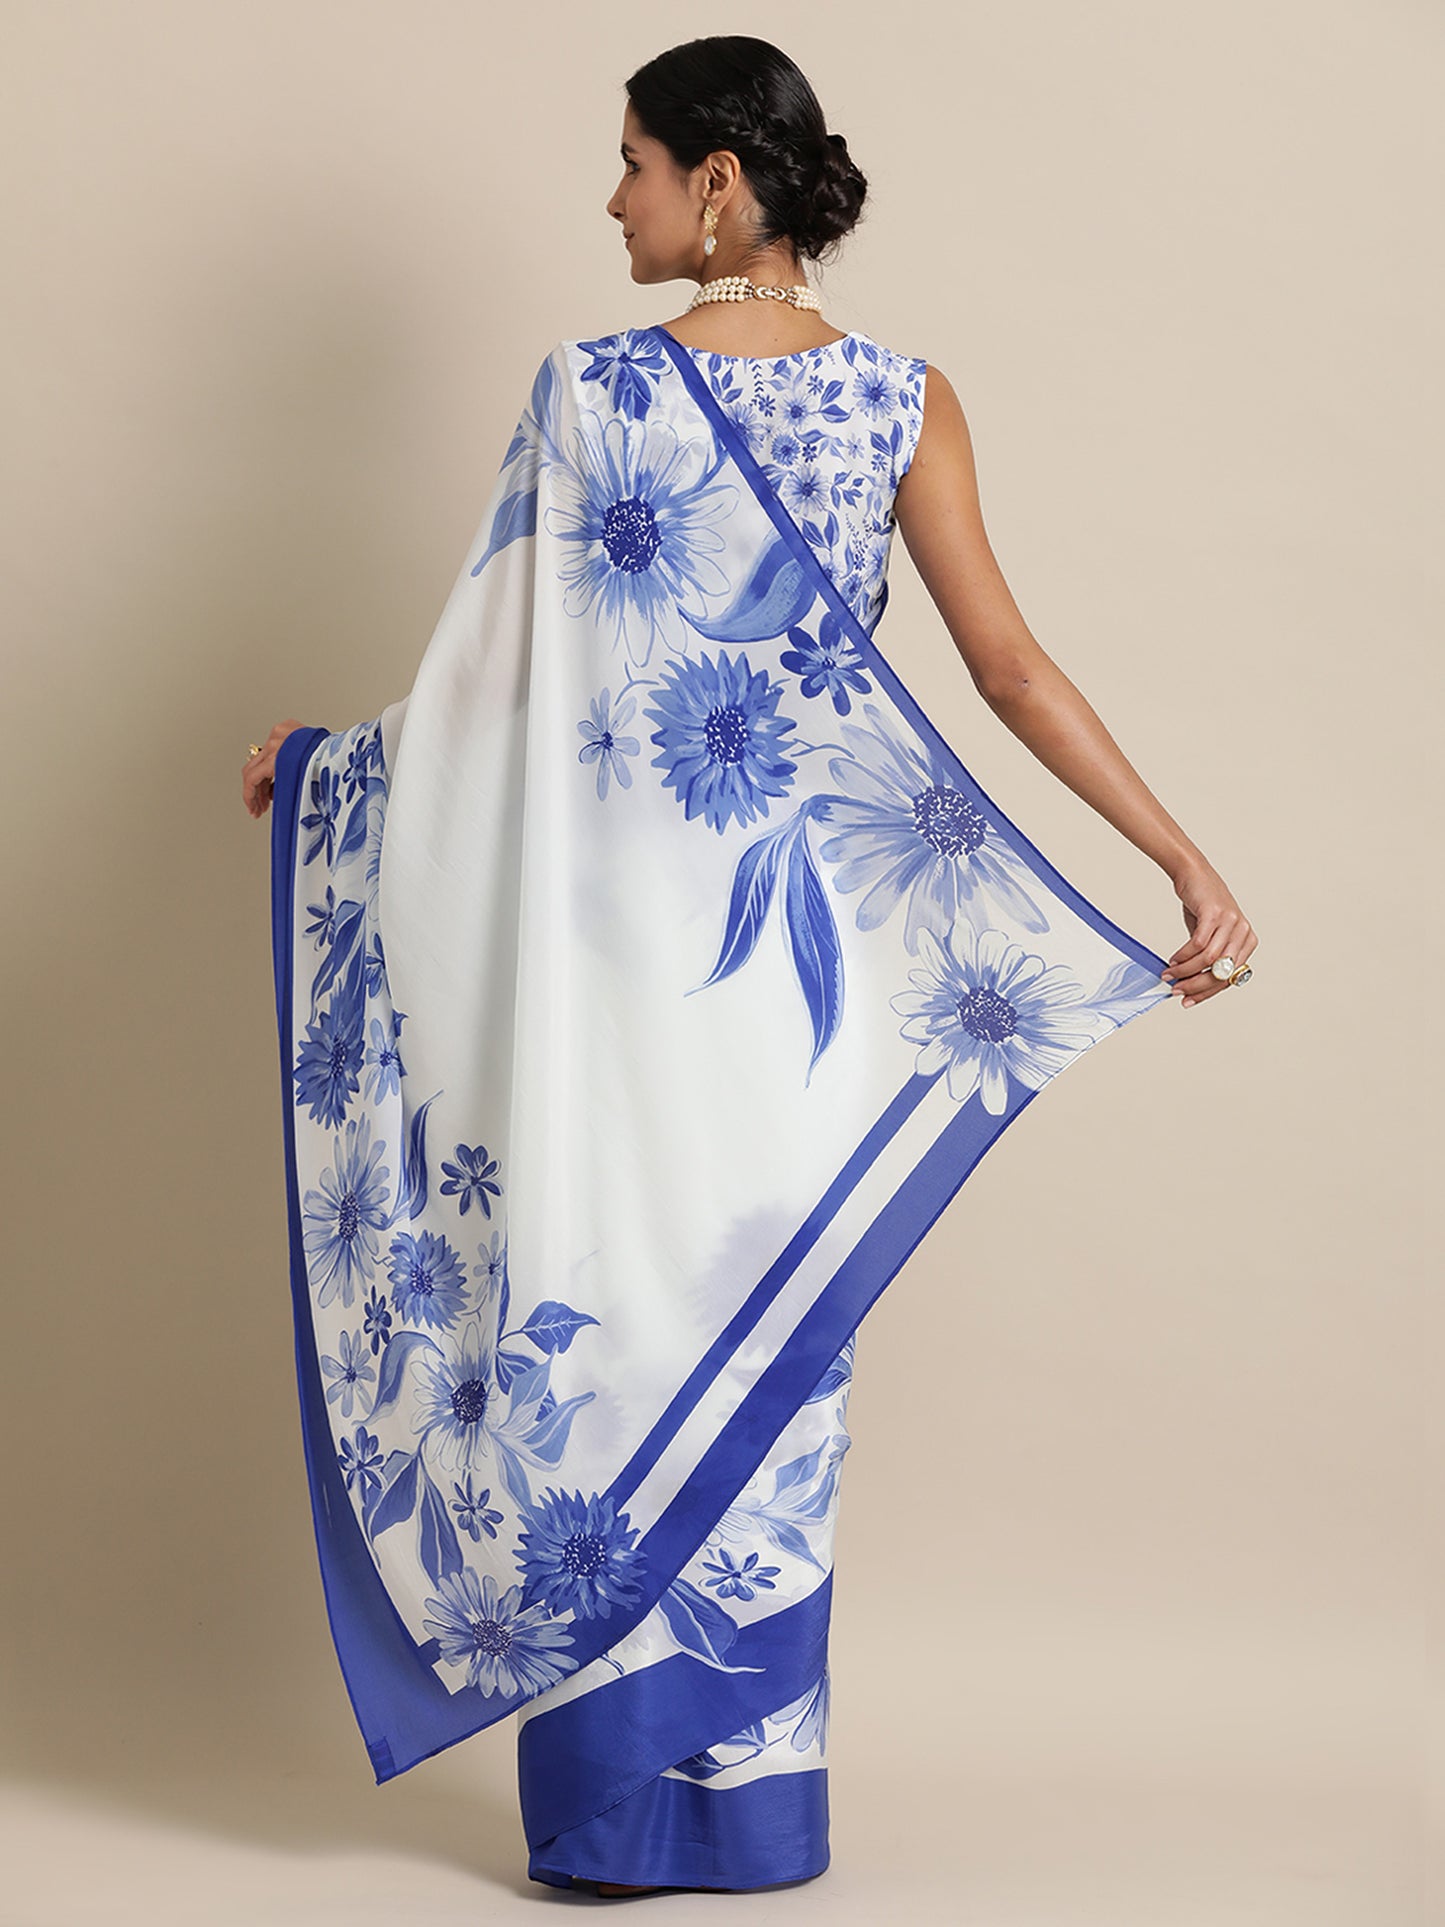 Majestic Blooms in Natural Crepe White Saree